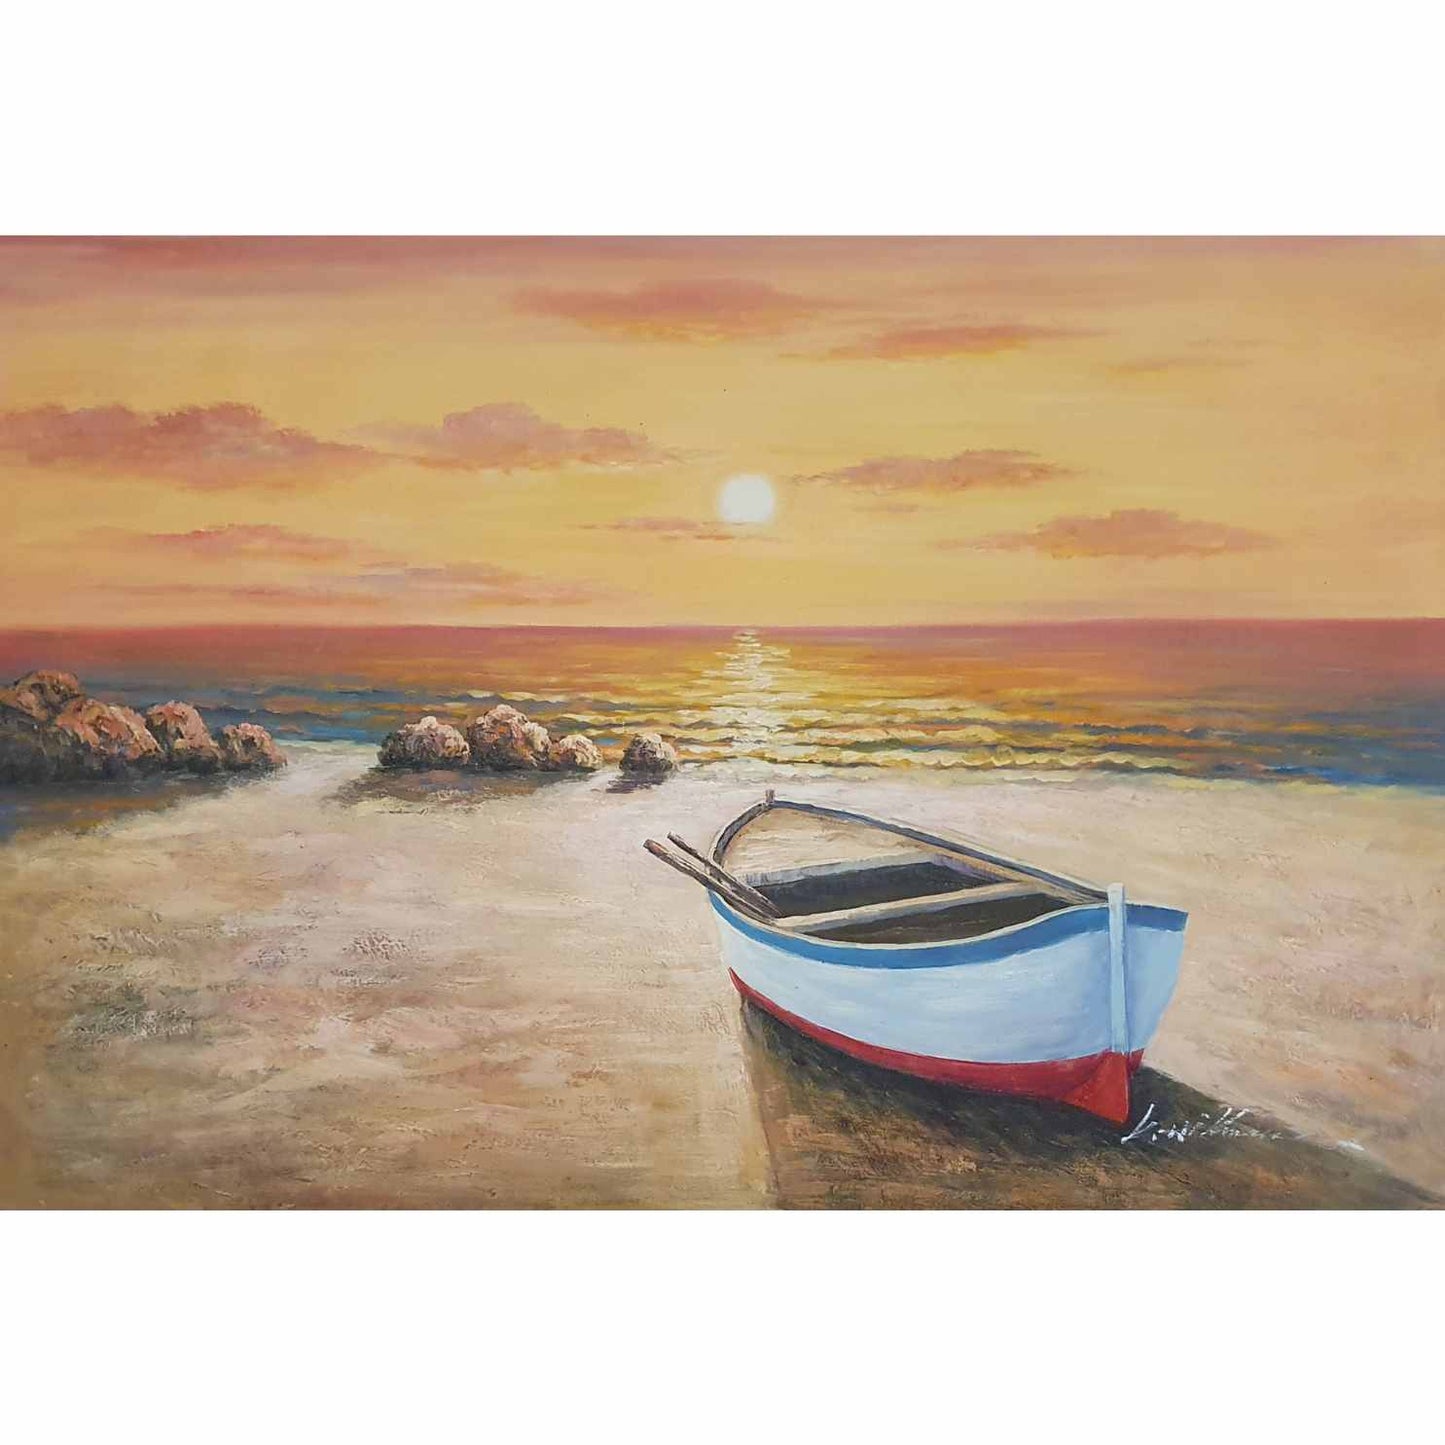 Painting the Boats, the Beach and the Sunset 90x60 cm